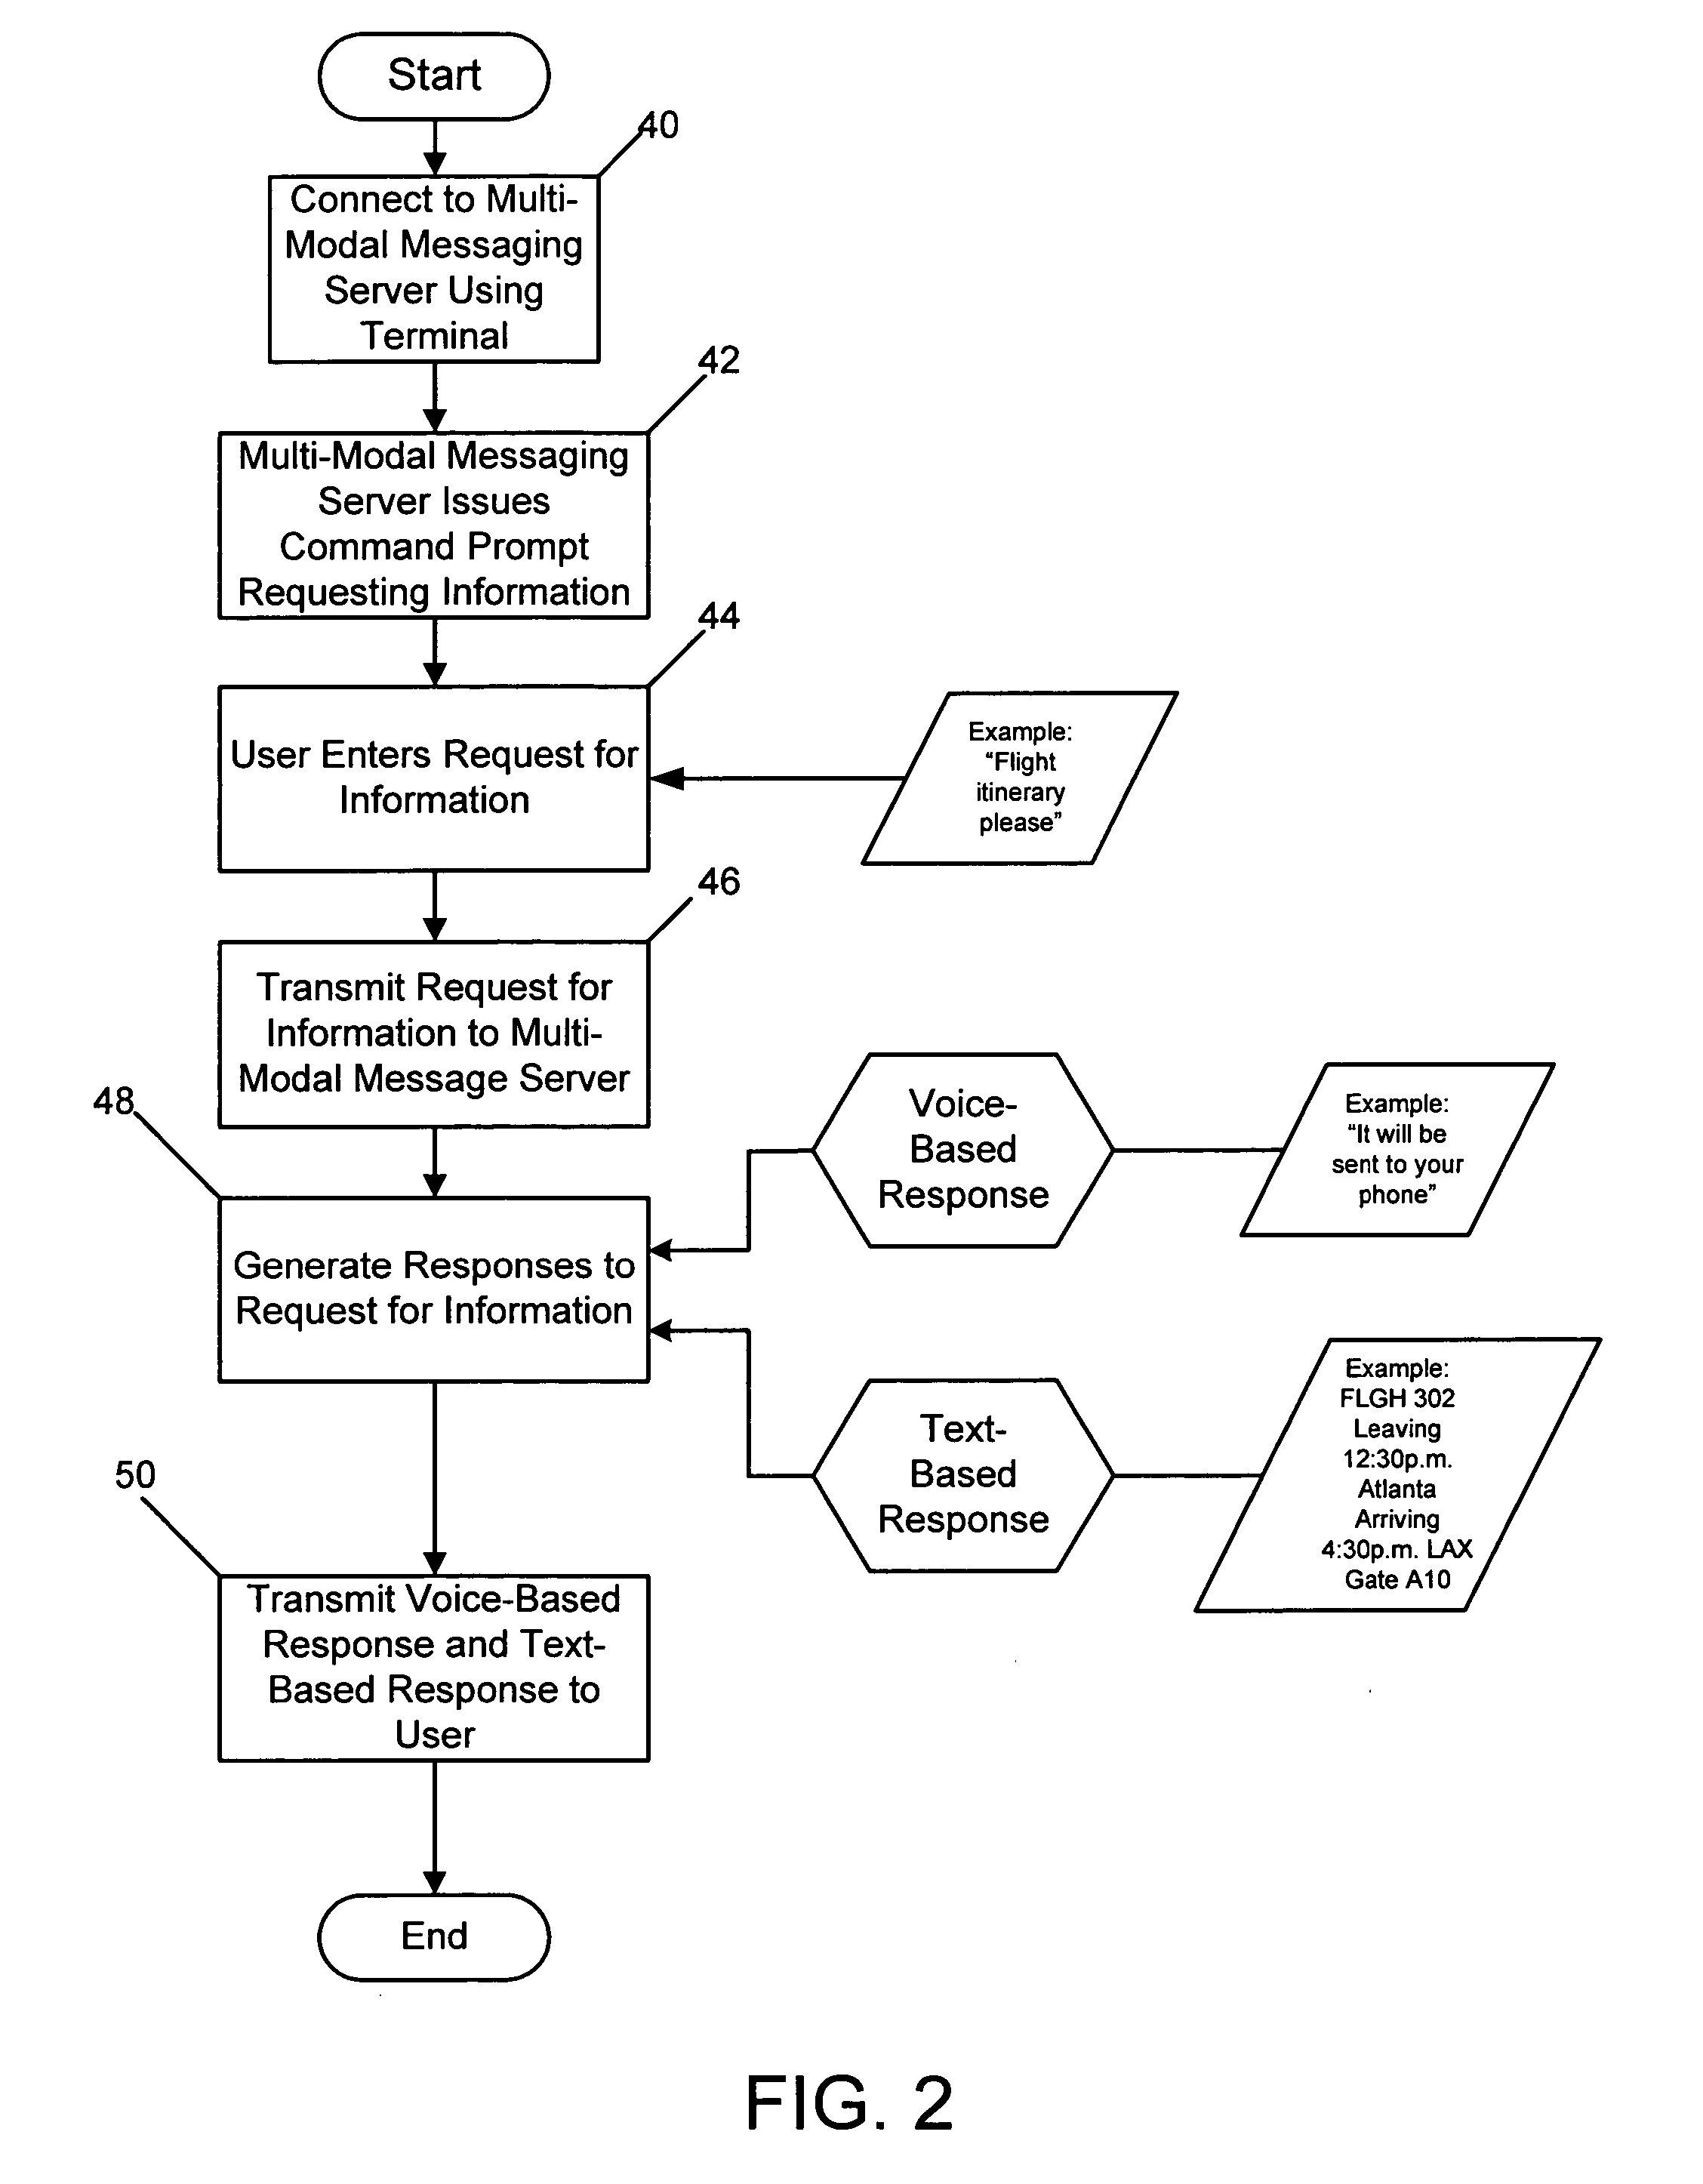 Directory assistance with multi-modal messaging